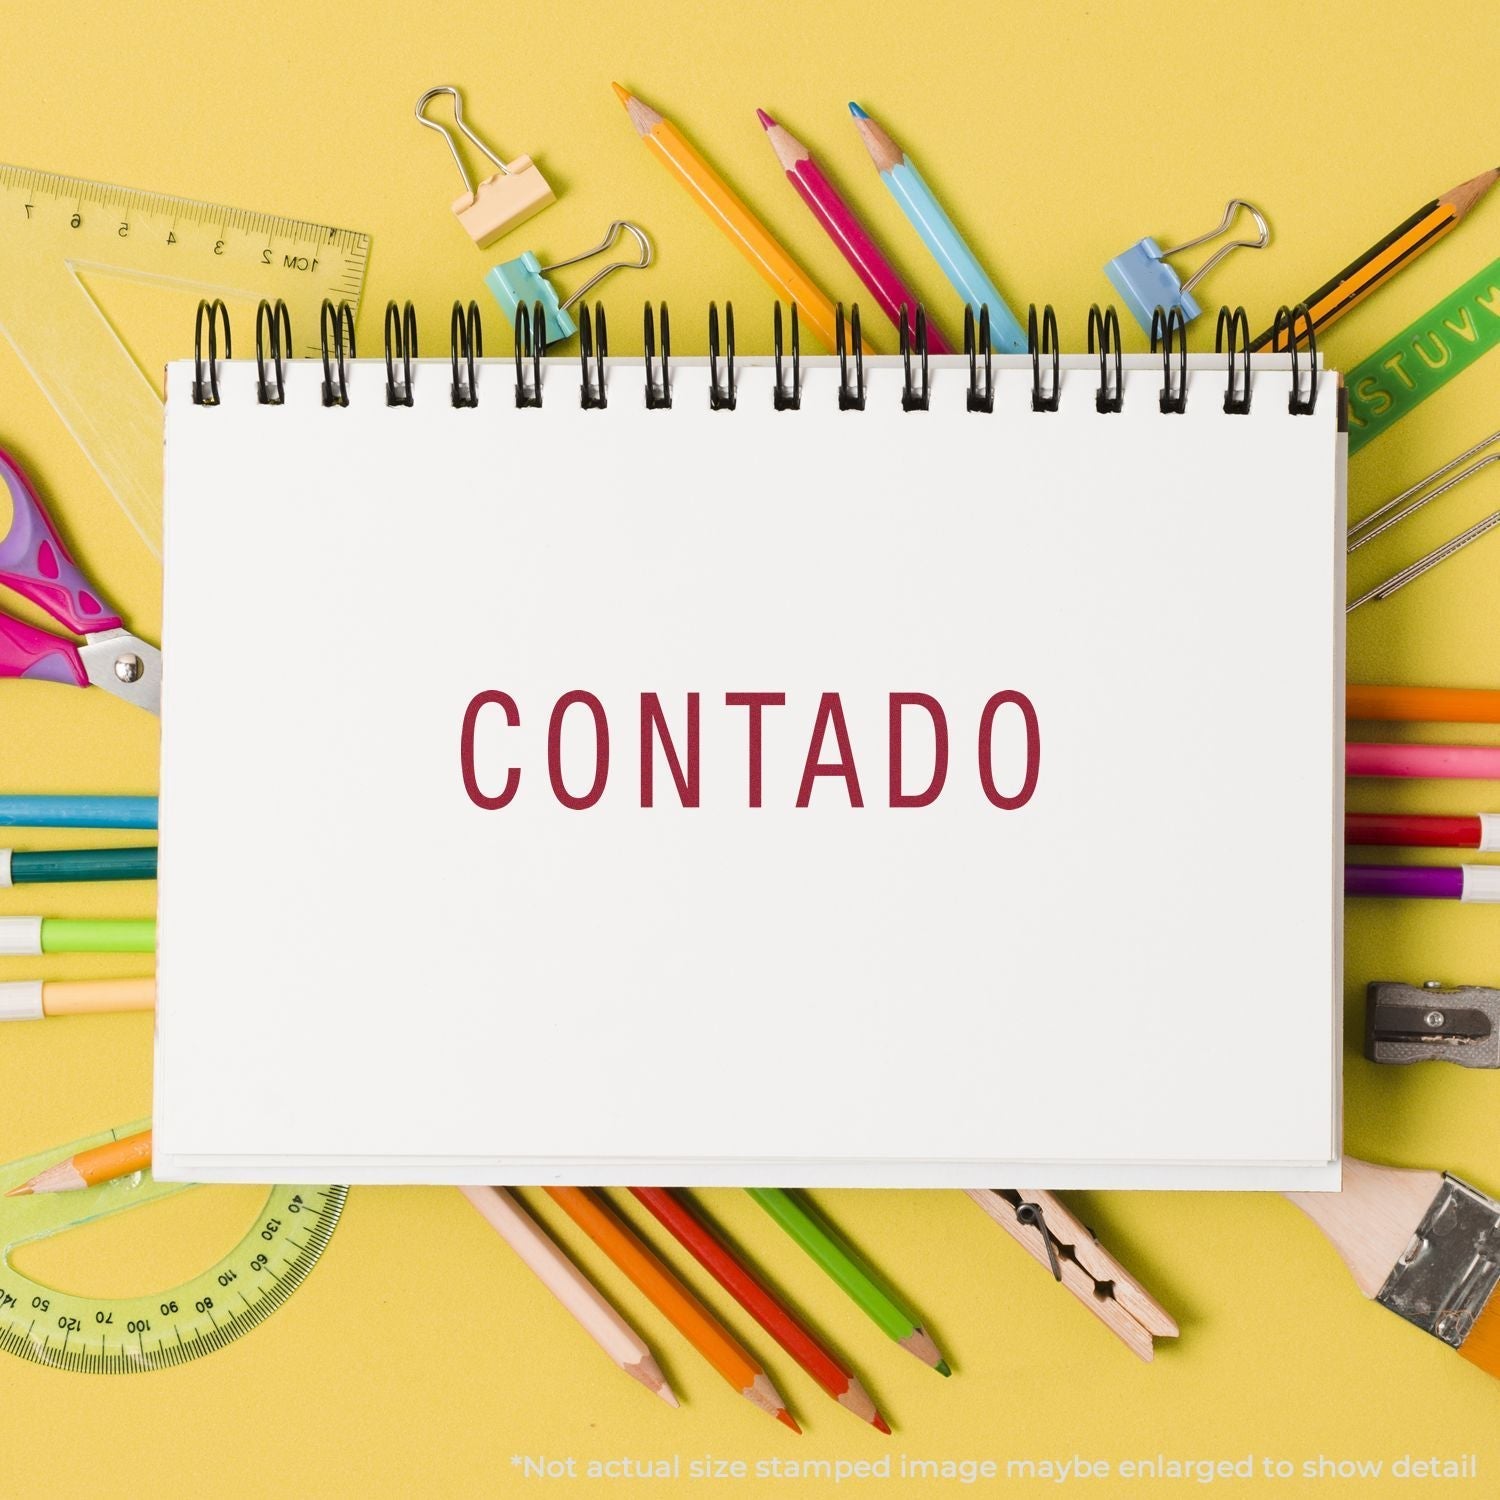 A stock office rubber stamp with a stamped image showing how the text "CONTADO" in a large font is displayed after stamping.